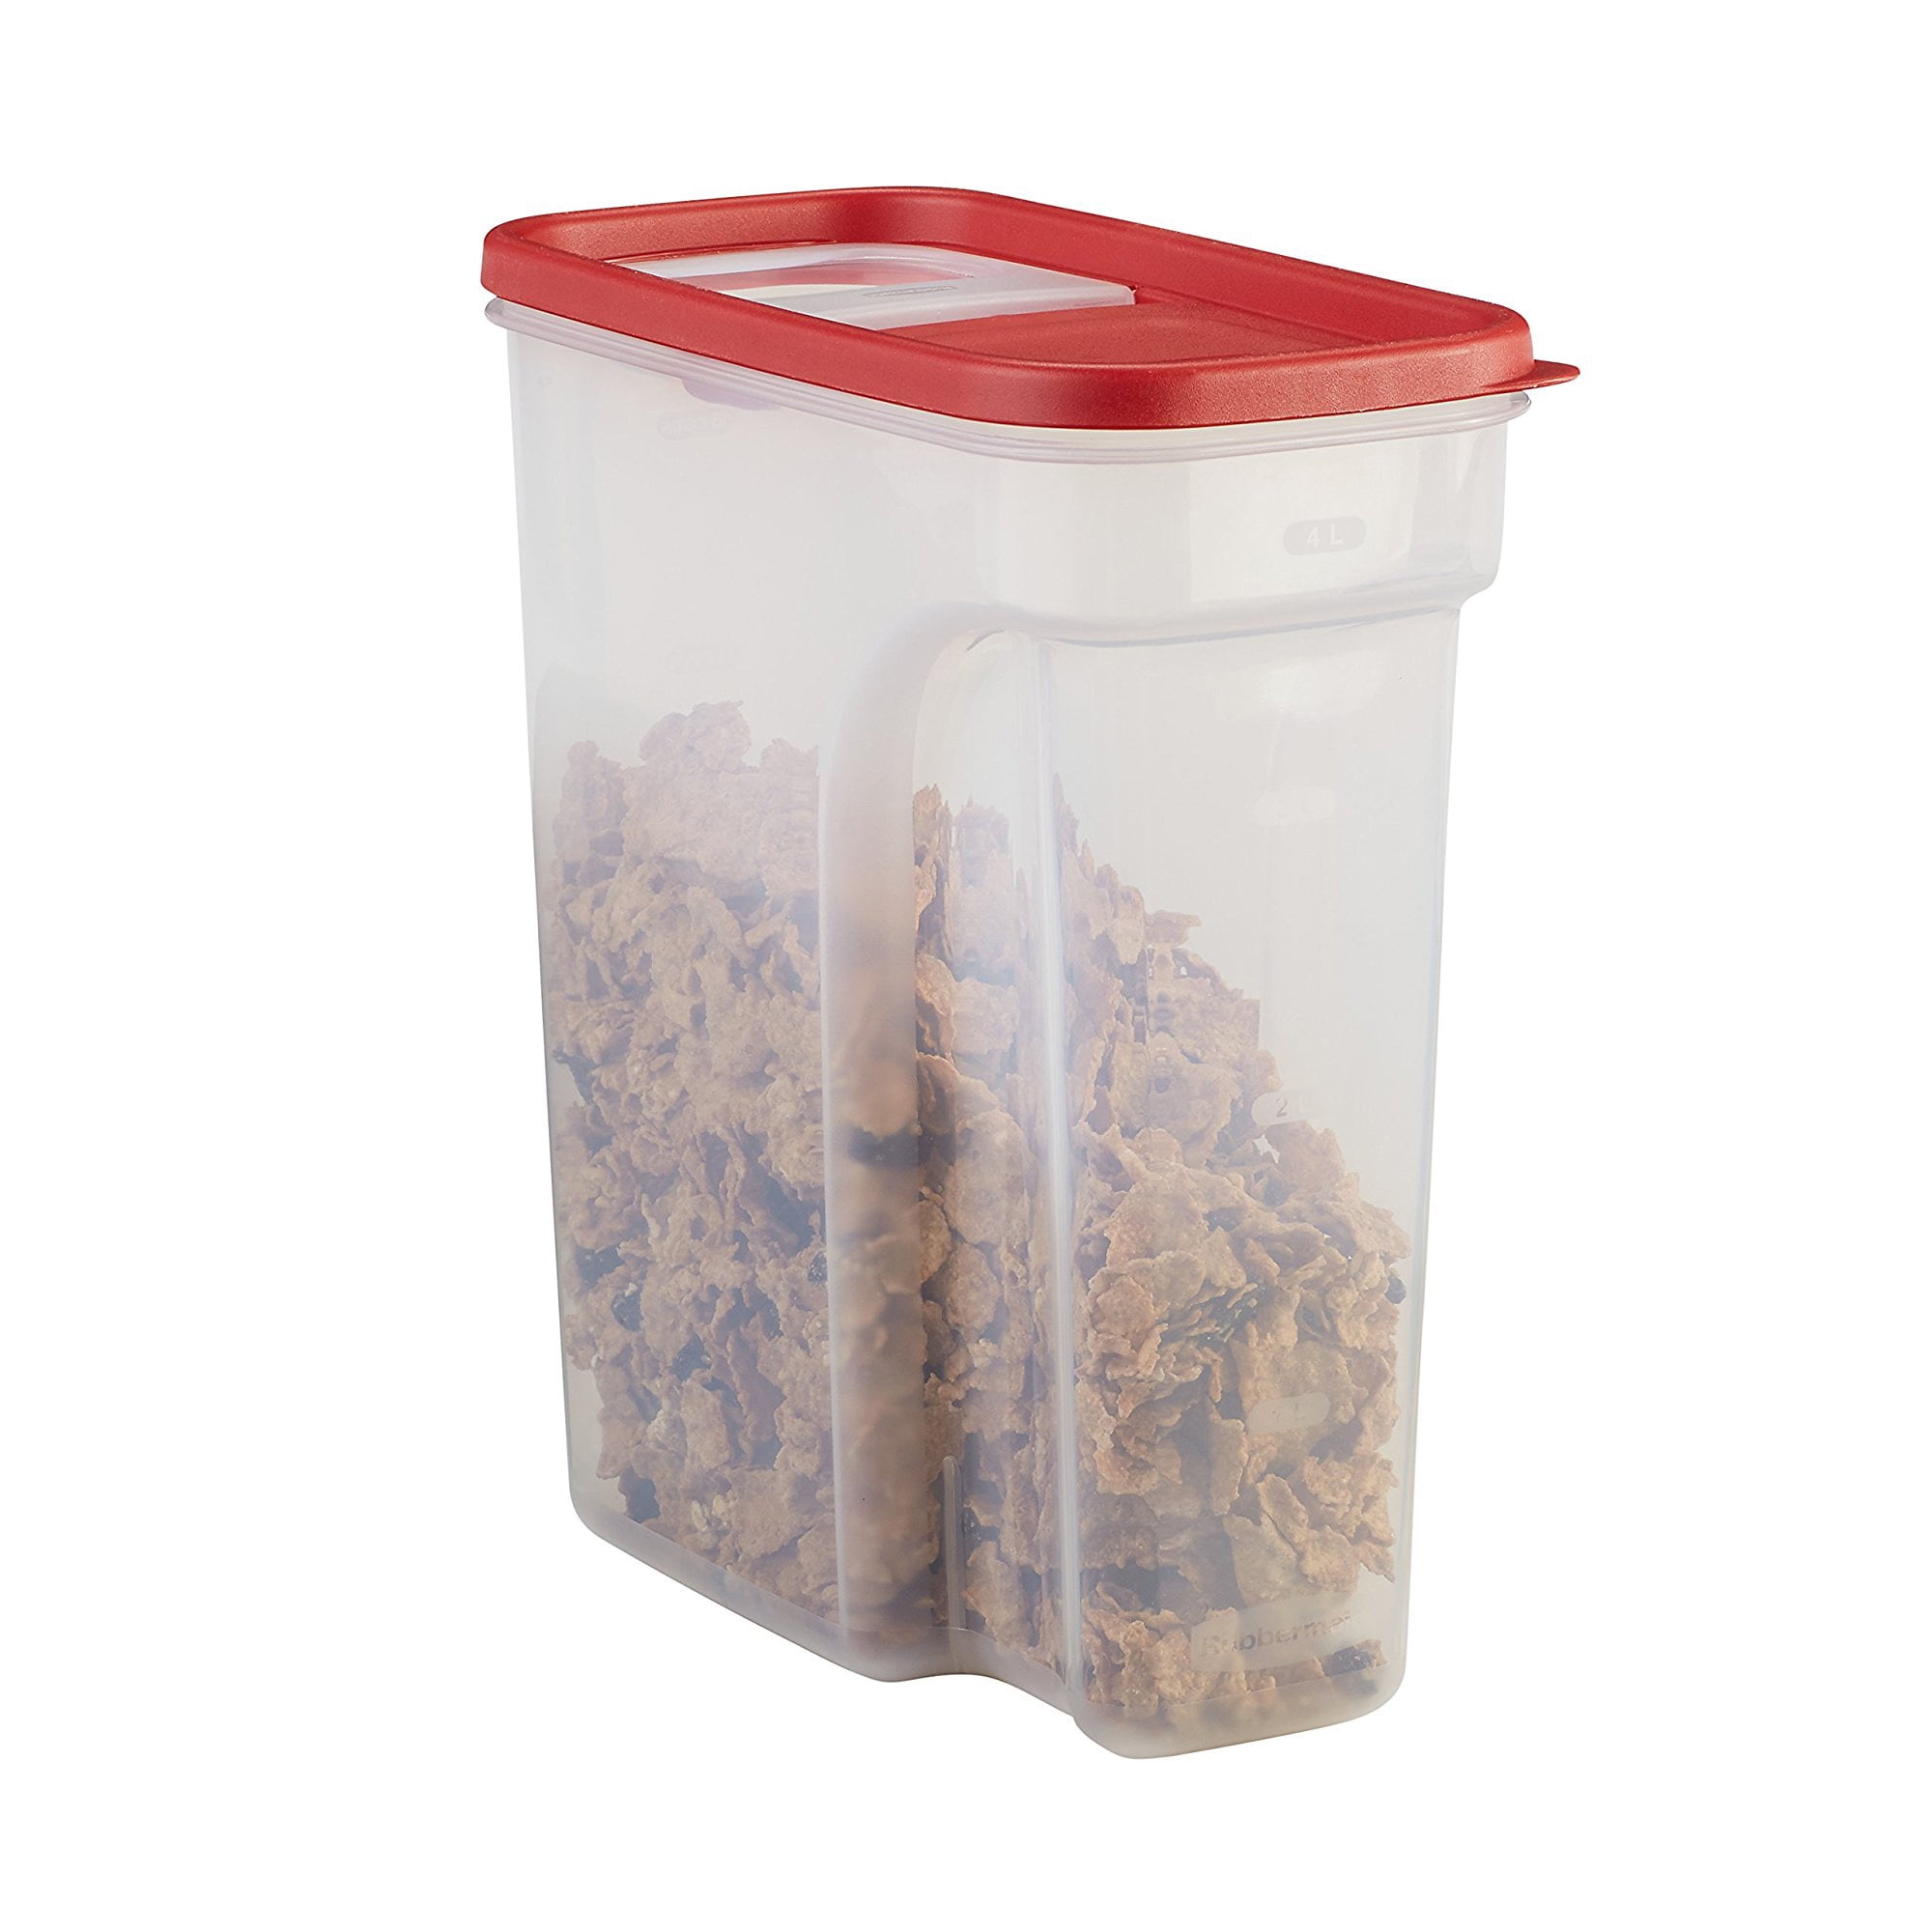 Rubbermaid 1856060 Modular Cereal Keeper Large